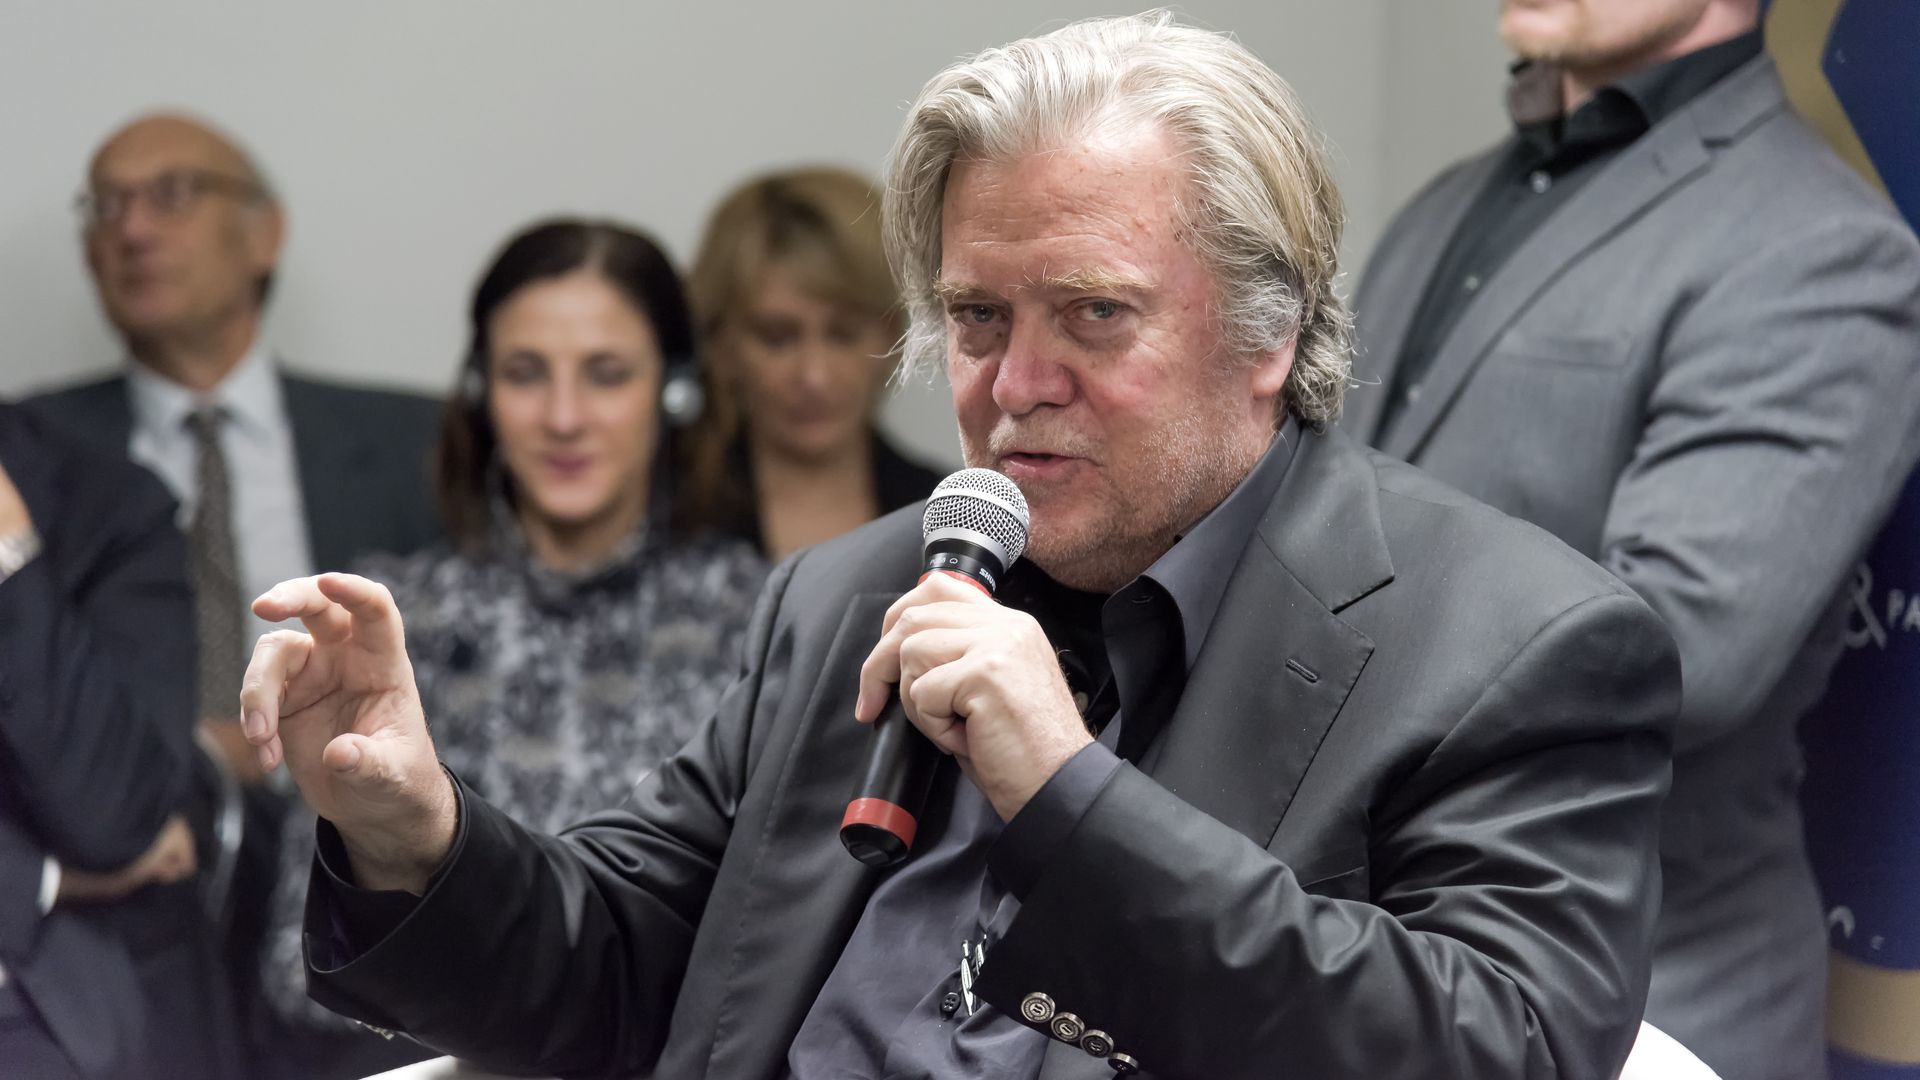 In this image, Steve Bannon is speaking into a microphone with a crowd behind him. 